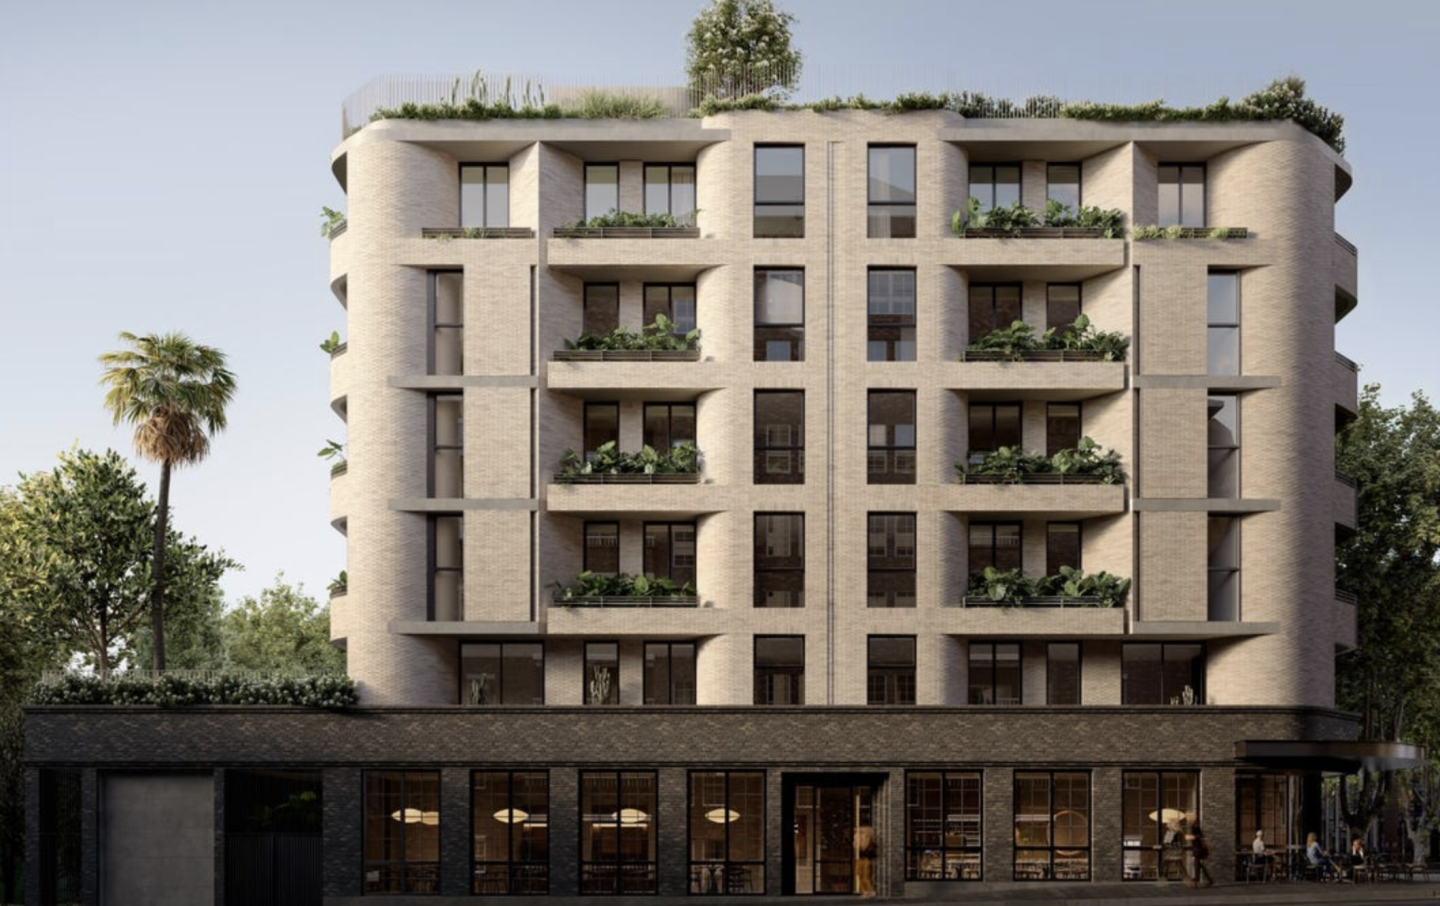 Peter Metzner to launch La Strada Residences in Potts Point, Macleay Street's first new apartments in two decades